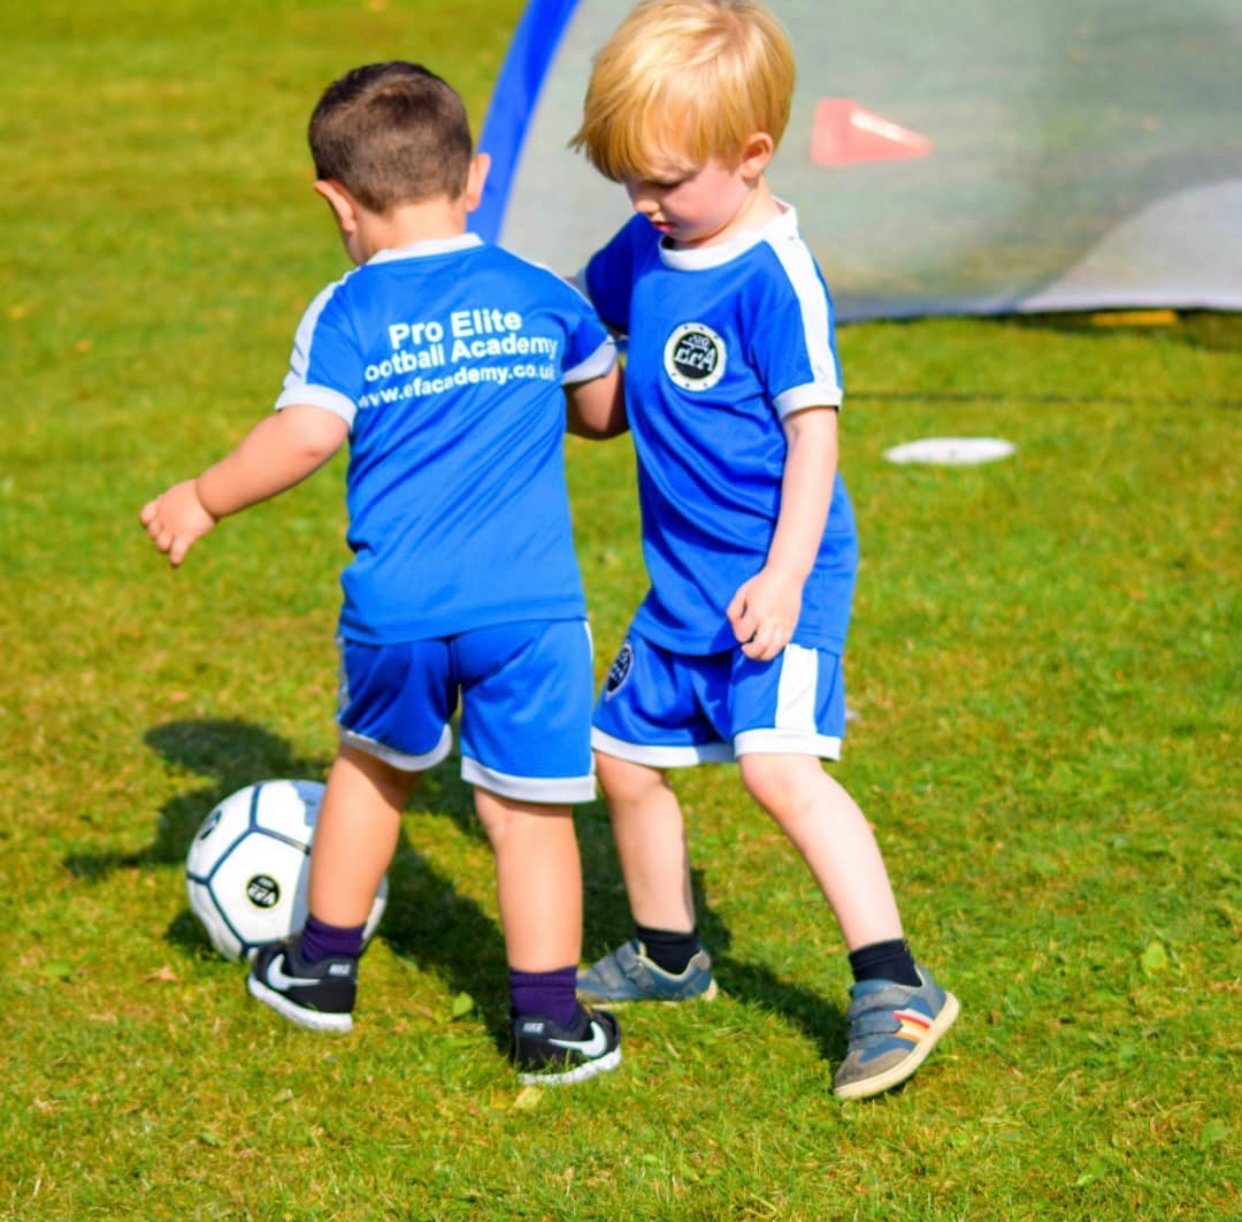 5-football-activities-you-can-do-with-your-child-at-home-pro-elite